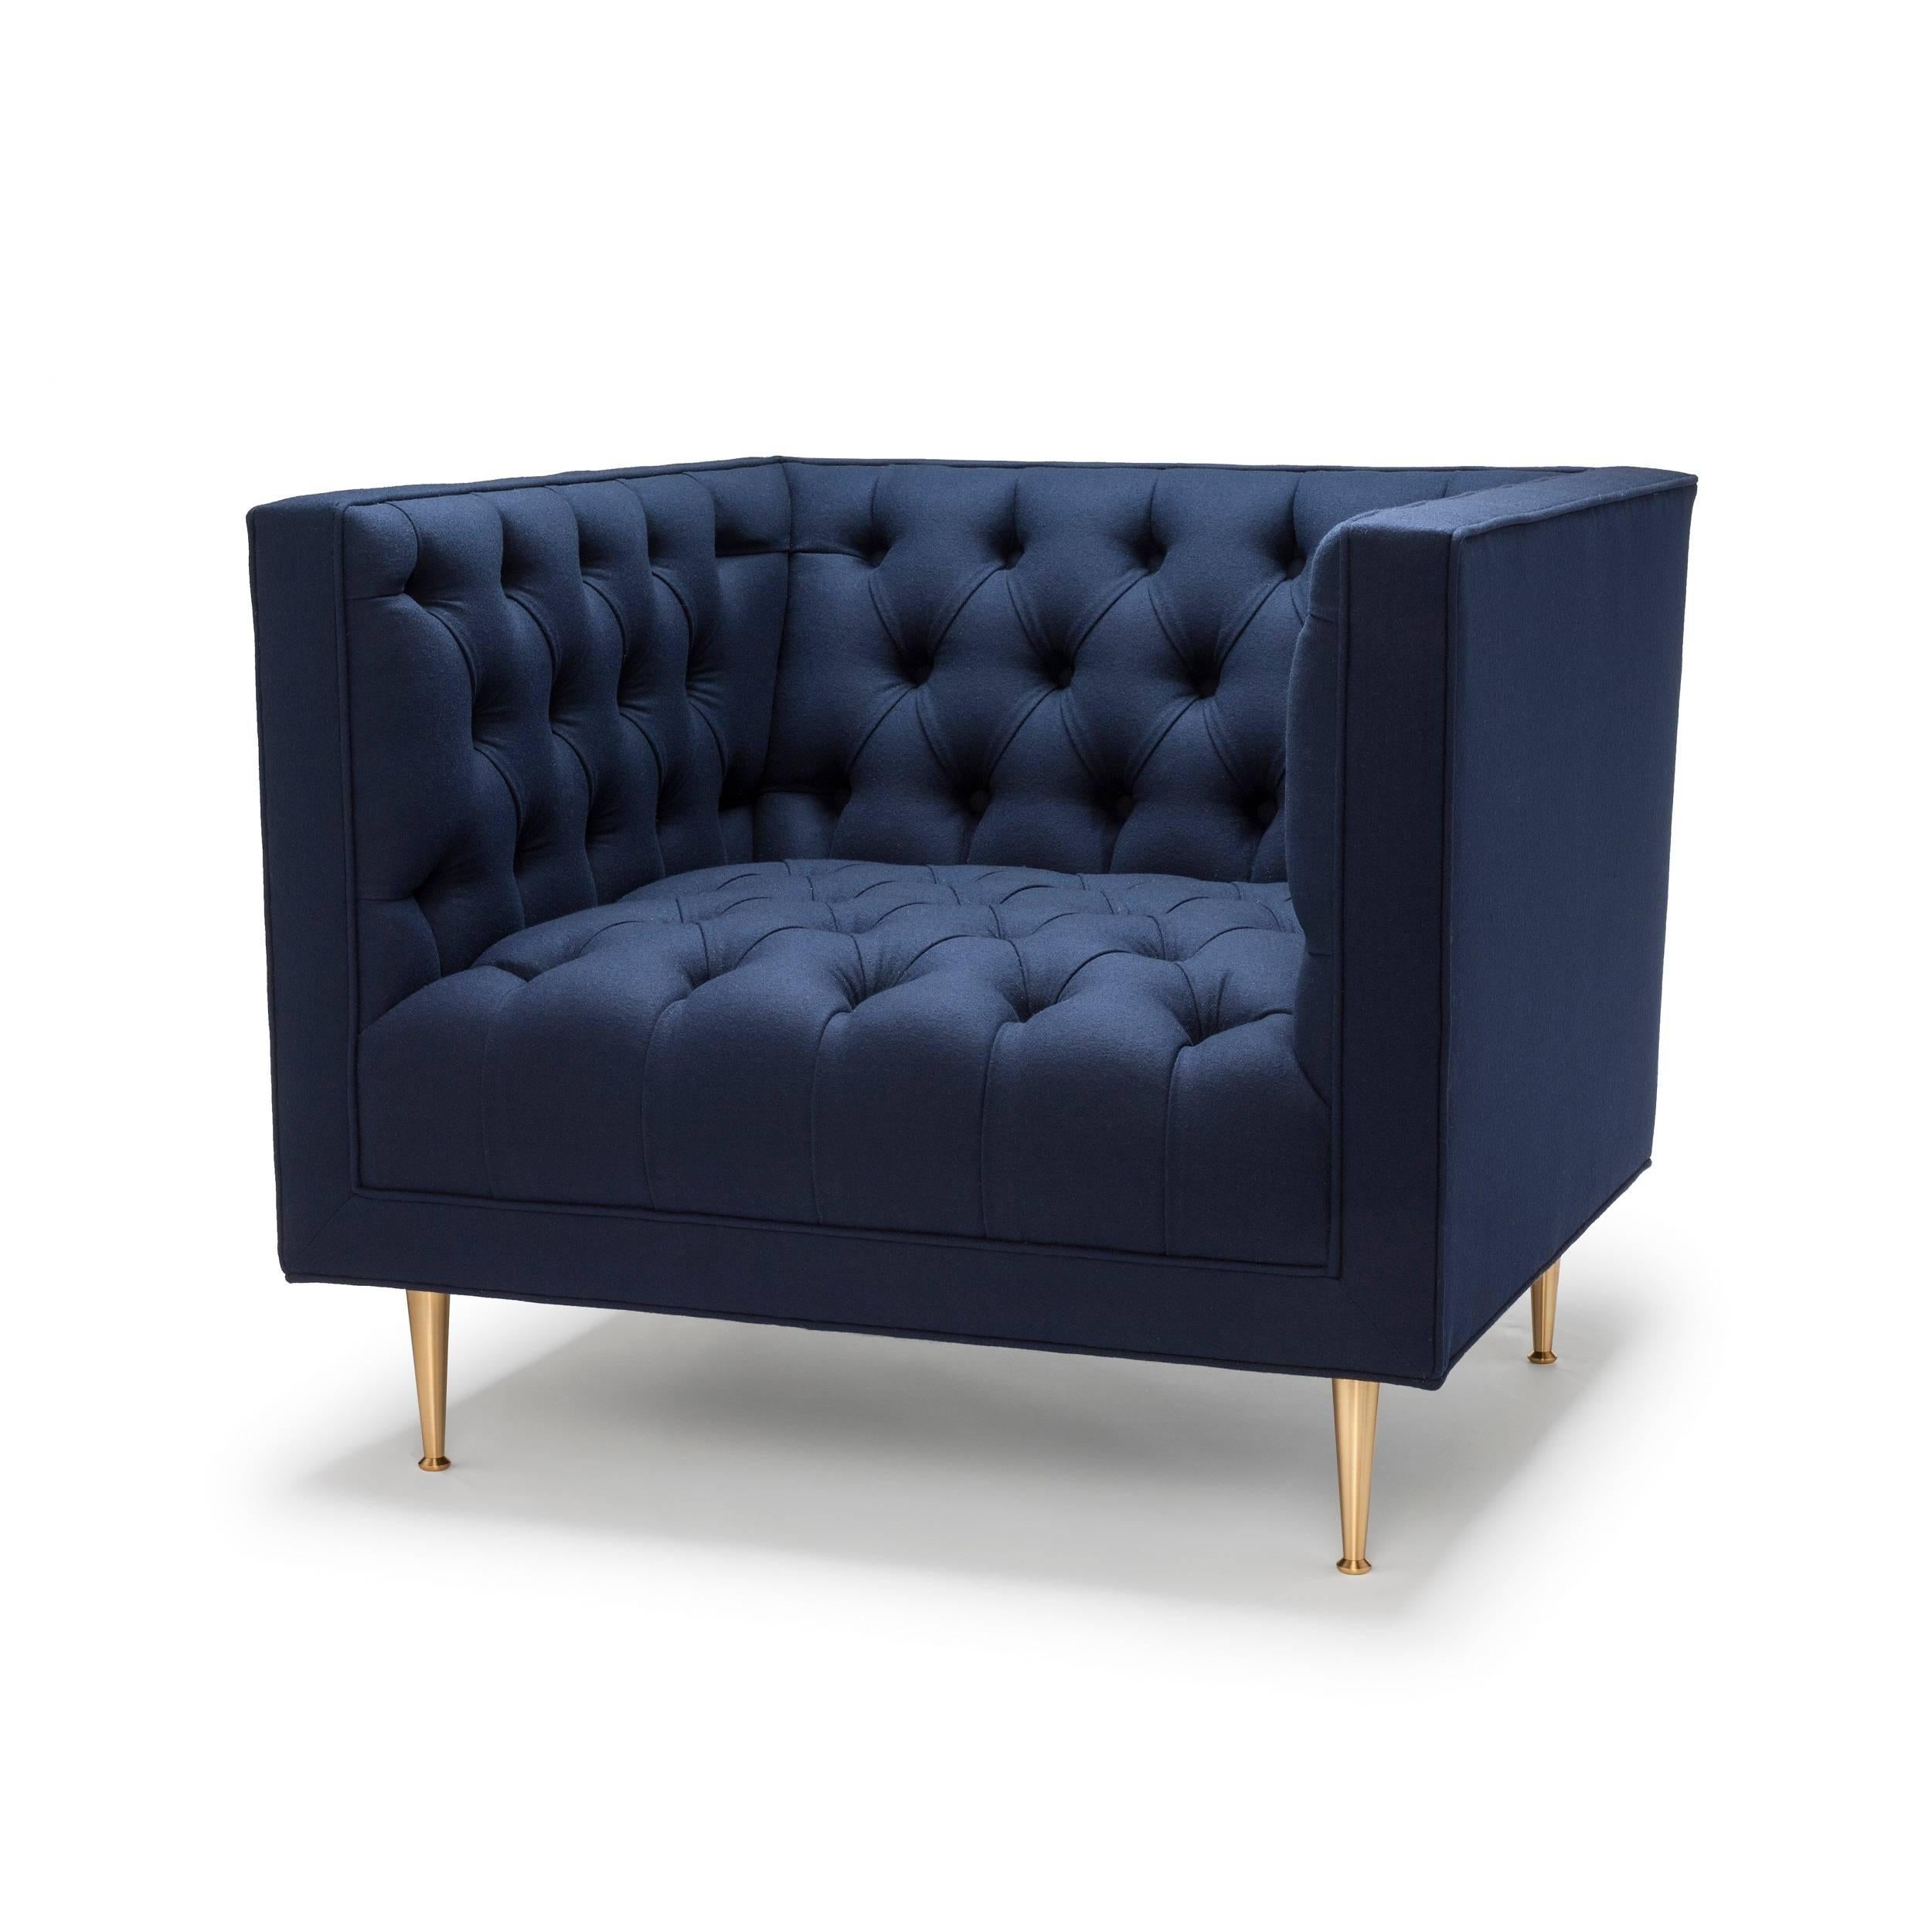 The Tux is our contemporary interpretation of the Classic Chesterfield. The deep buttoning and tailored detailing make this piece a personal favourite. Tux Chair Special Edition shown here upholstered in Navy Melton Wool with legs in natural brass.